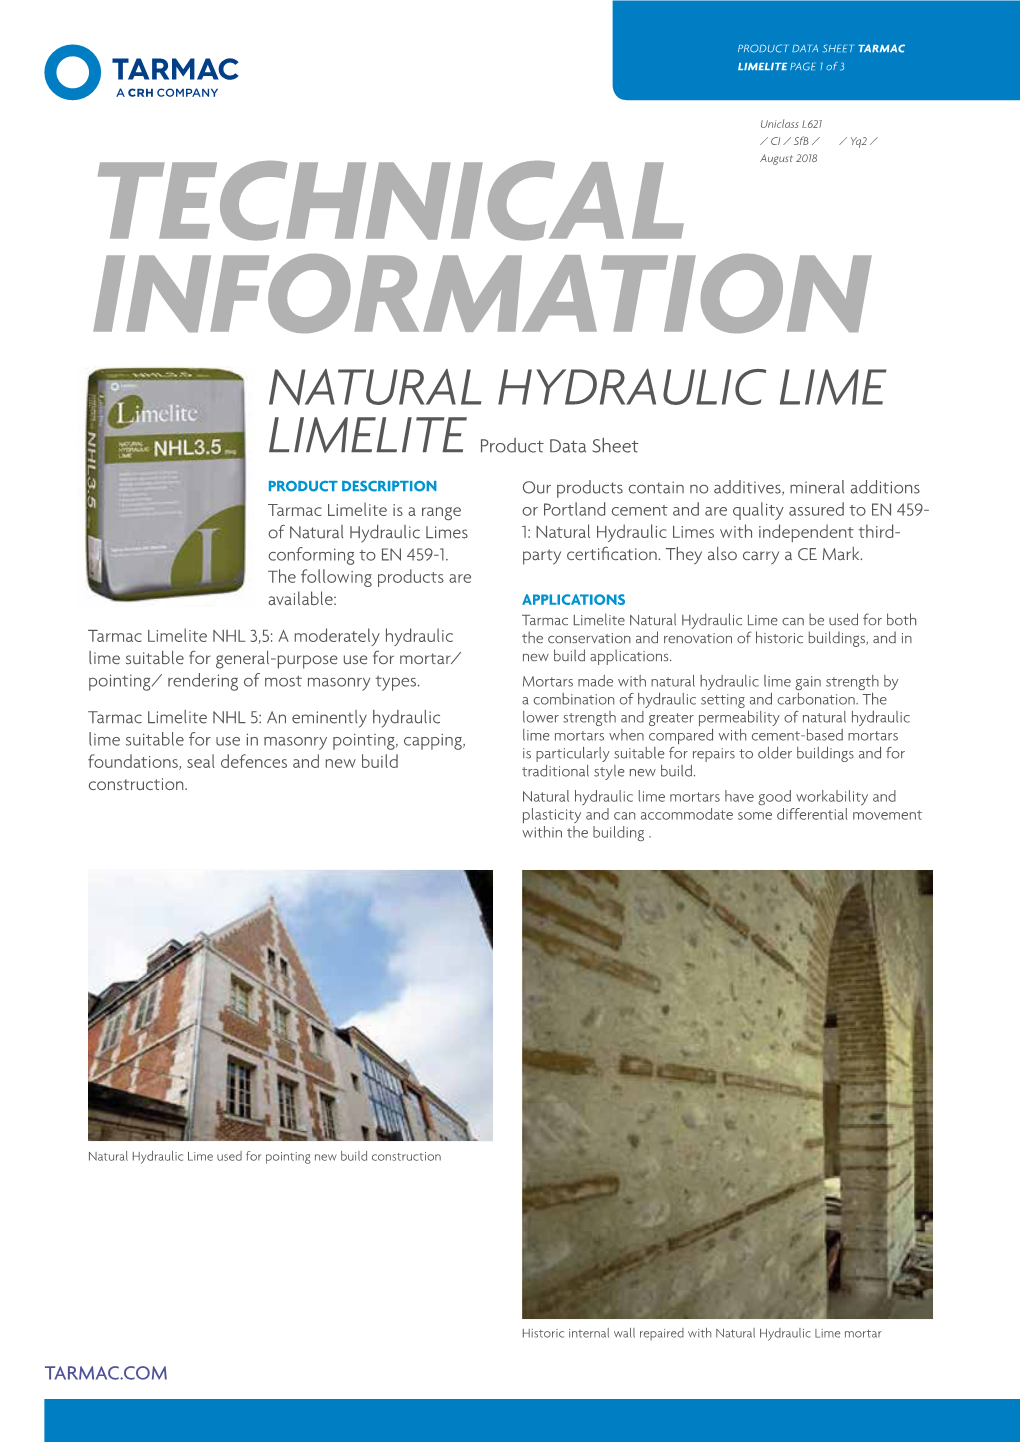 Limelite Natural Hydraulic Lime